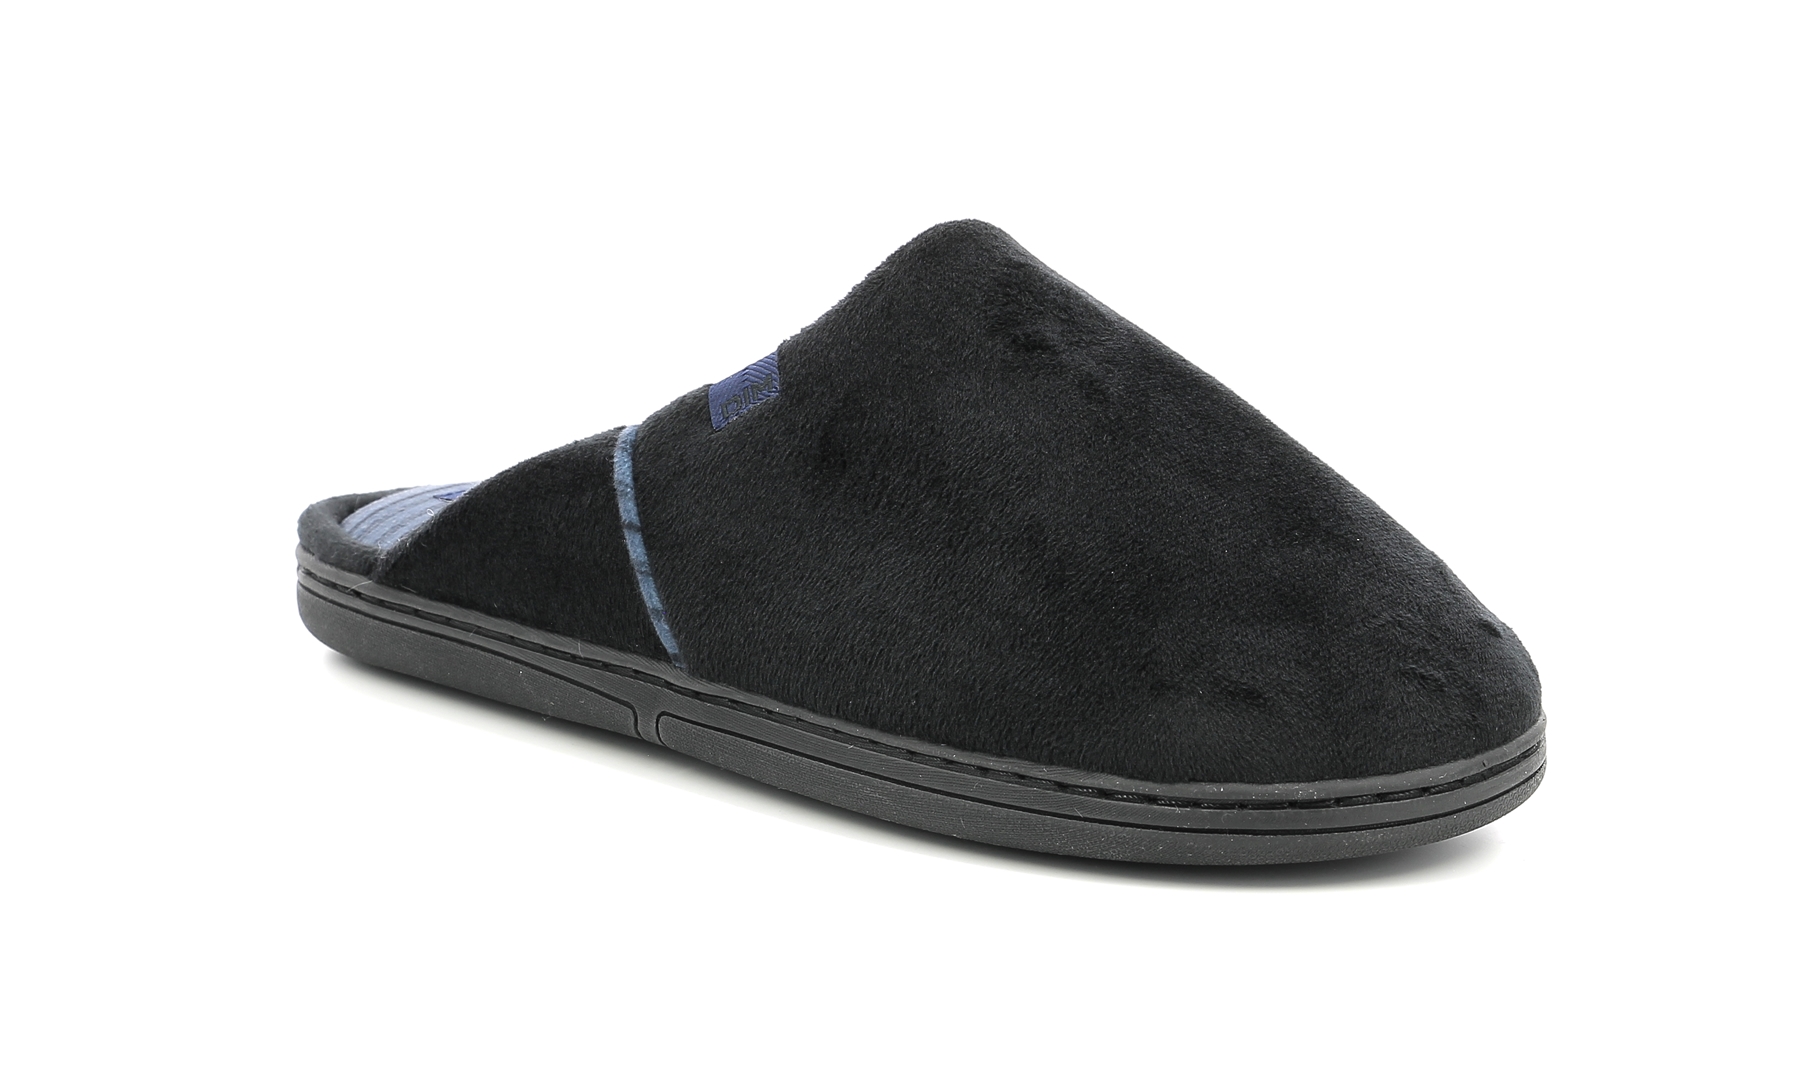 Soft black and blue slippers for men